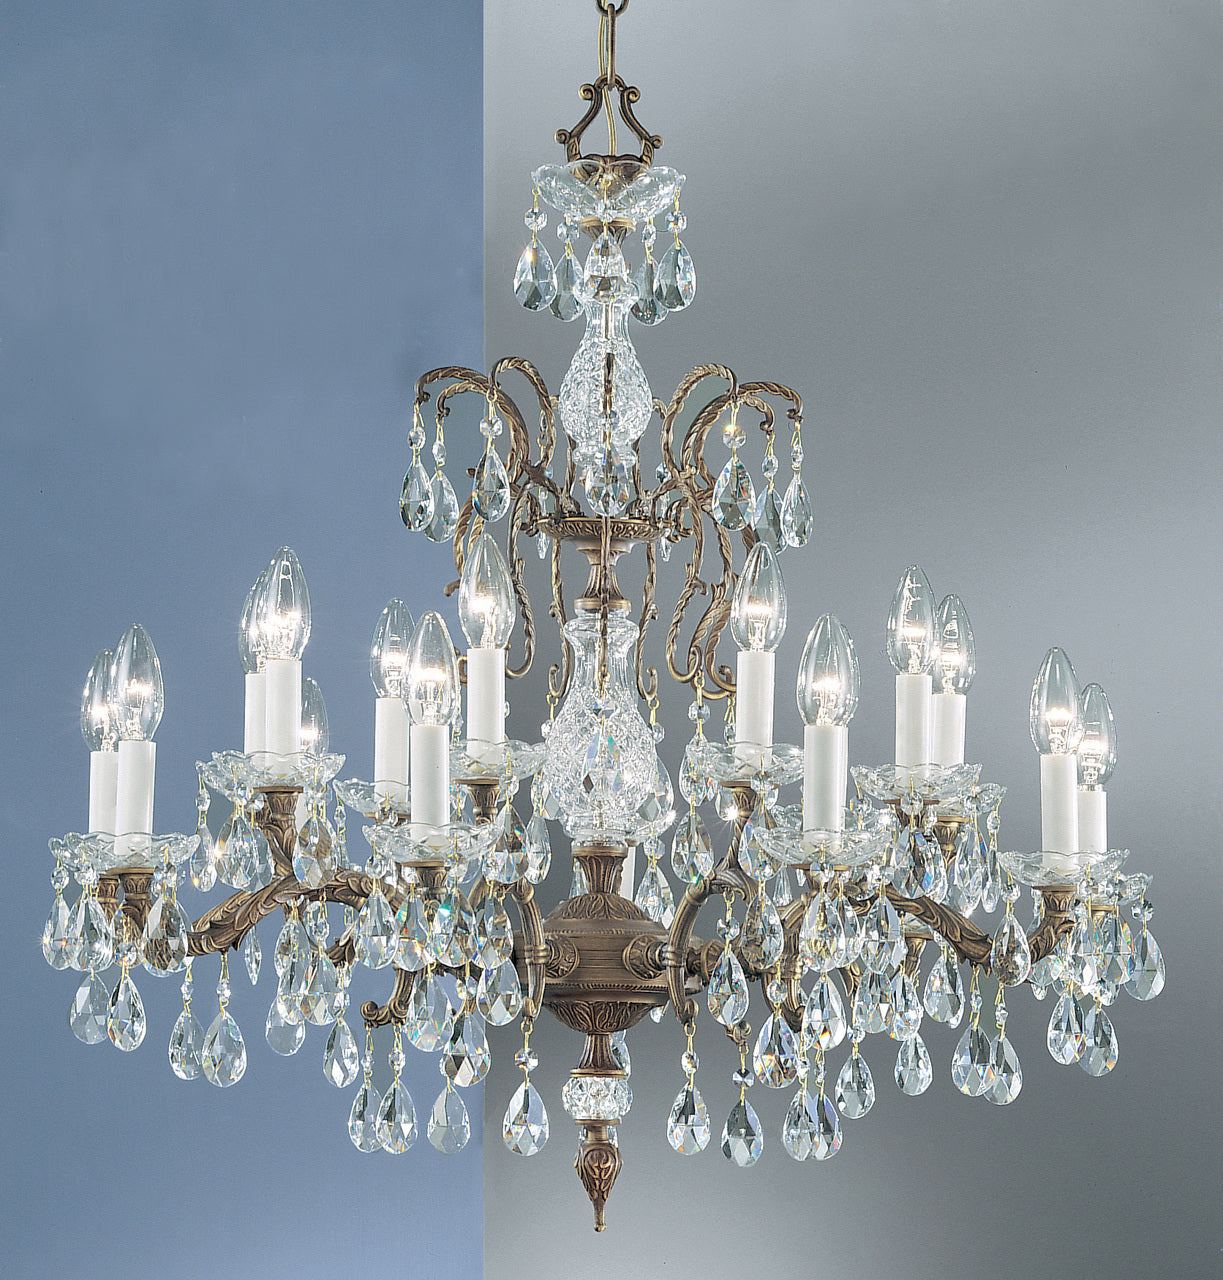 Classic Lighting 5538 OWB SC Madrid Crystal/Cast Brass Chandelier in Olde World Bronze (Imported from Spain)